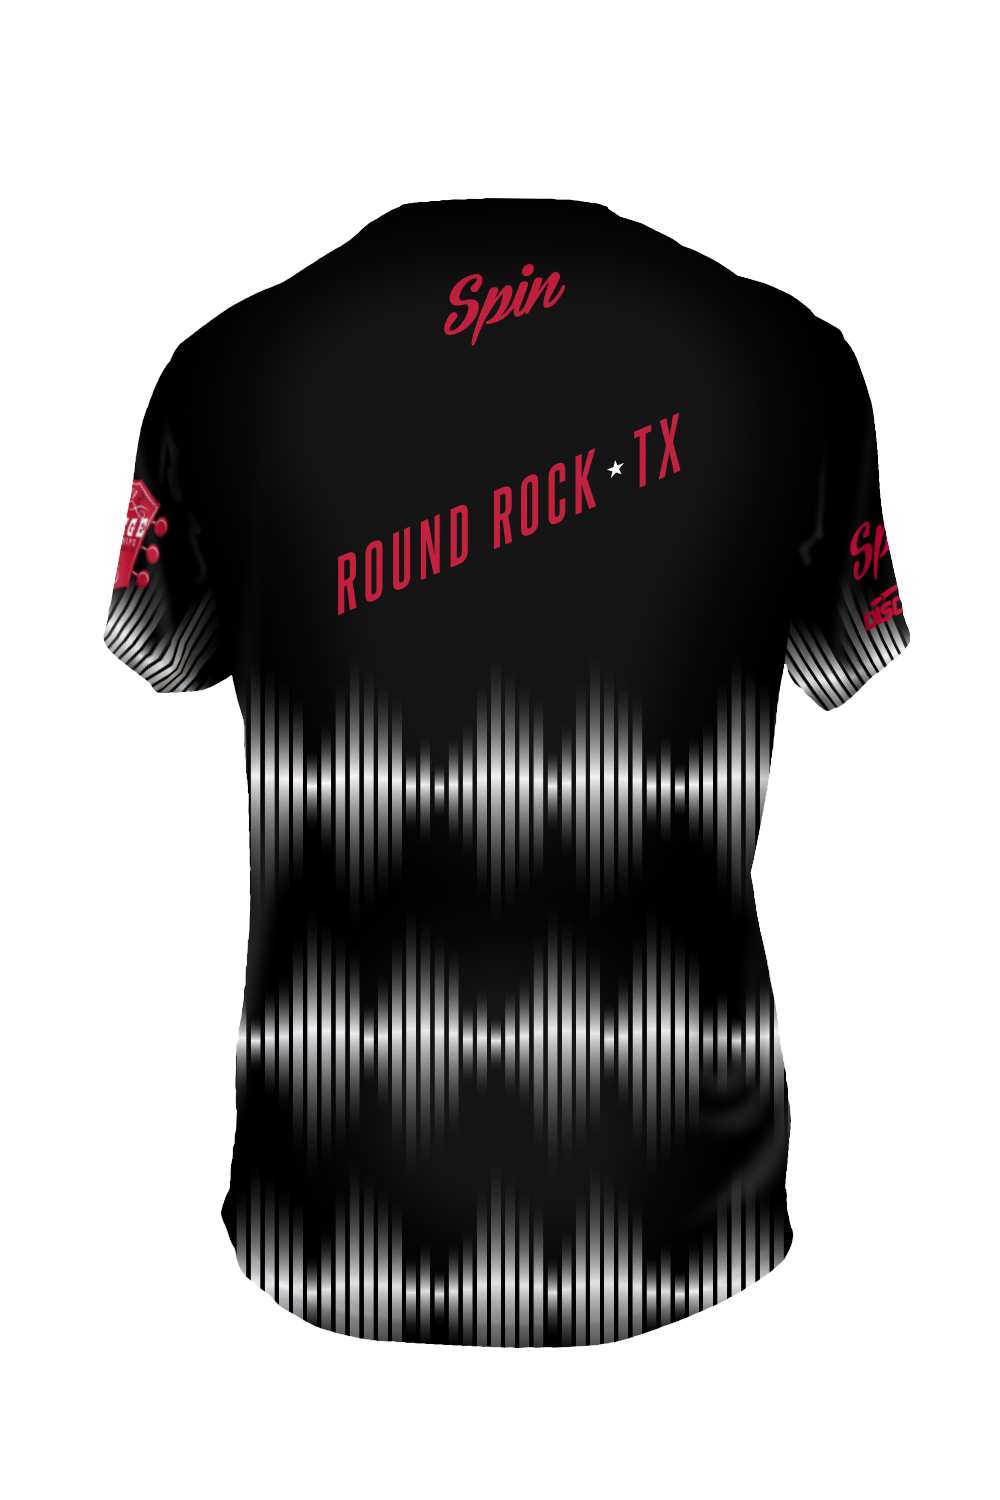 College Championships 2019 Sound Waves Short Sleeve Jersey